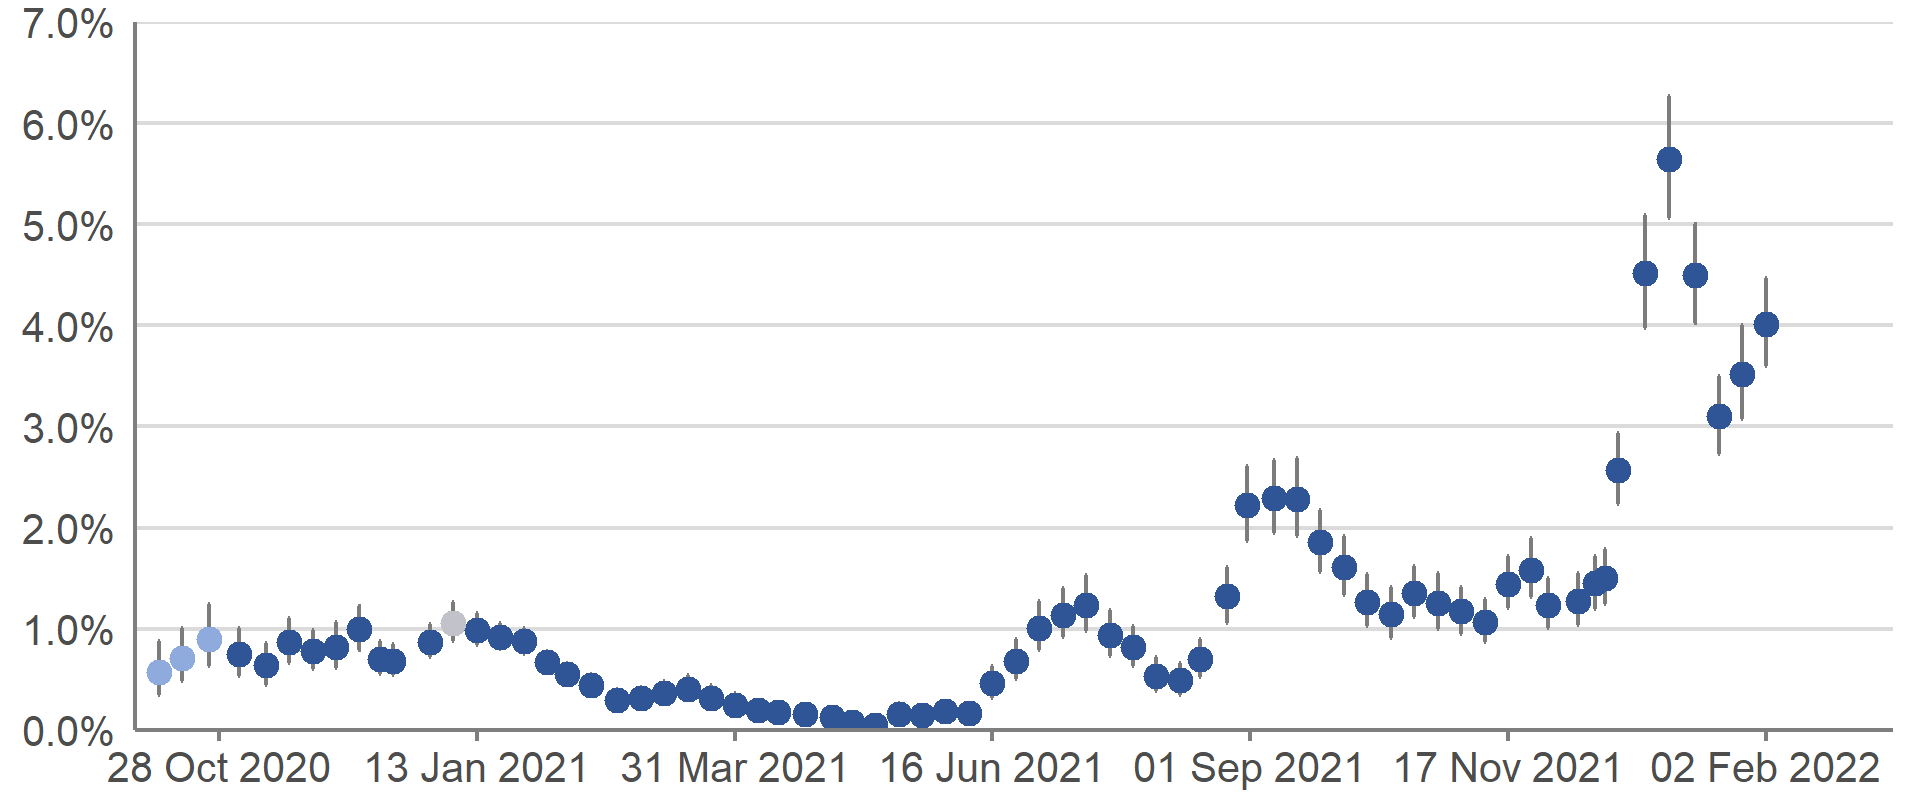 The estimated percentage of people testing positive for COVID-19 reached the greatest peak since the start of the pandemic in the week 1 to 7 January 2022, after three weeks of rapid increase. The percentage of people testing positive then decreased up to the week ending 22 January 2022. In the most recent week, the estimate has increased again.